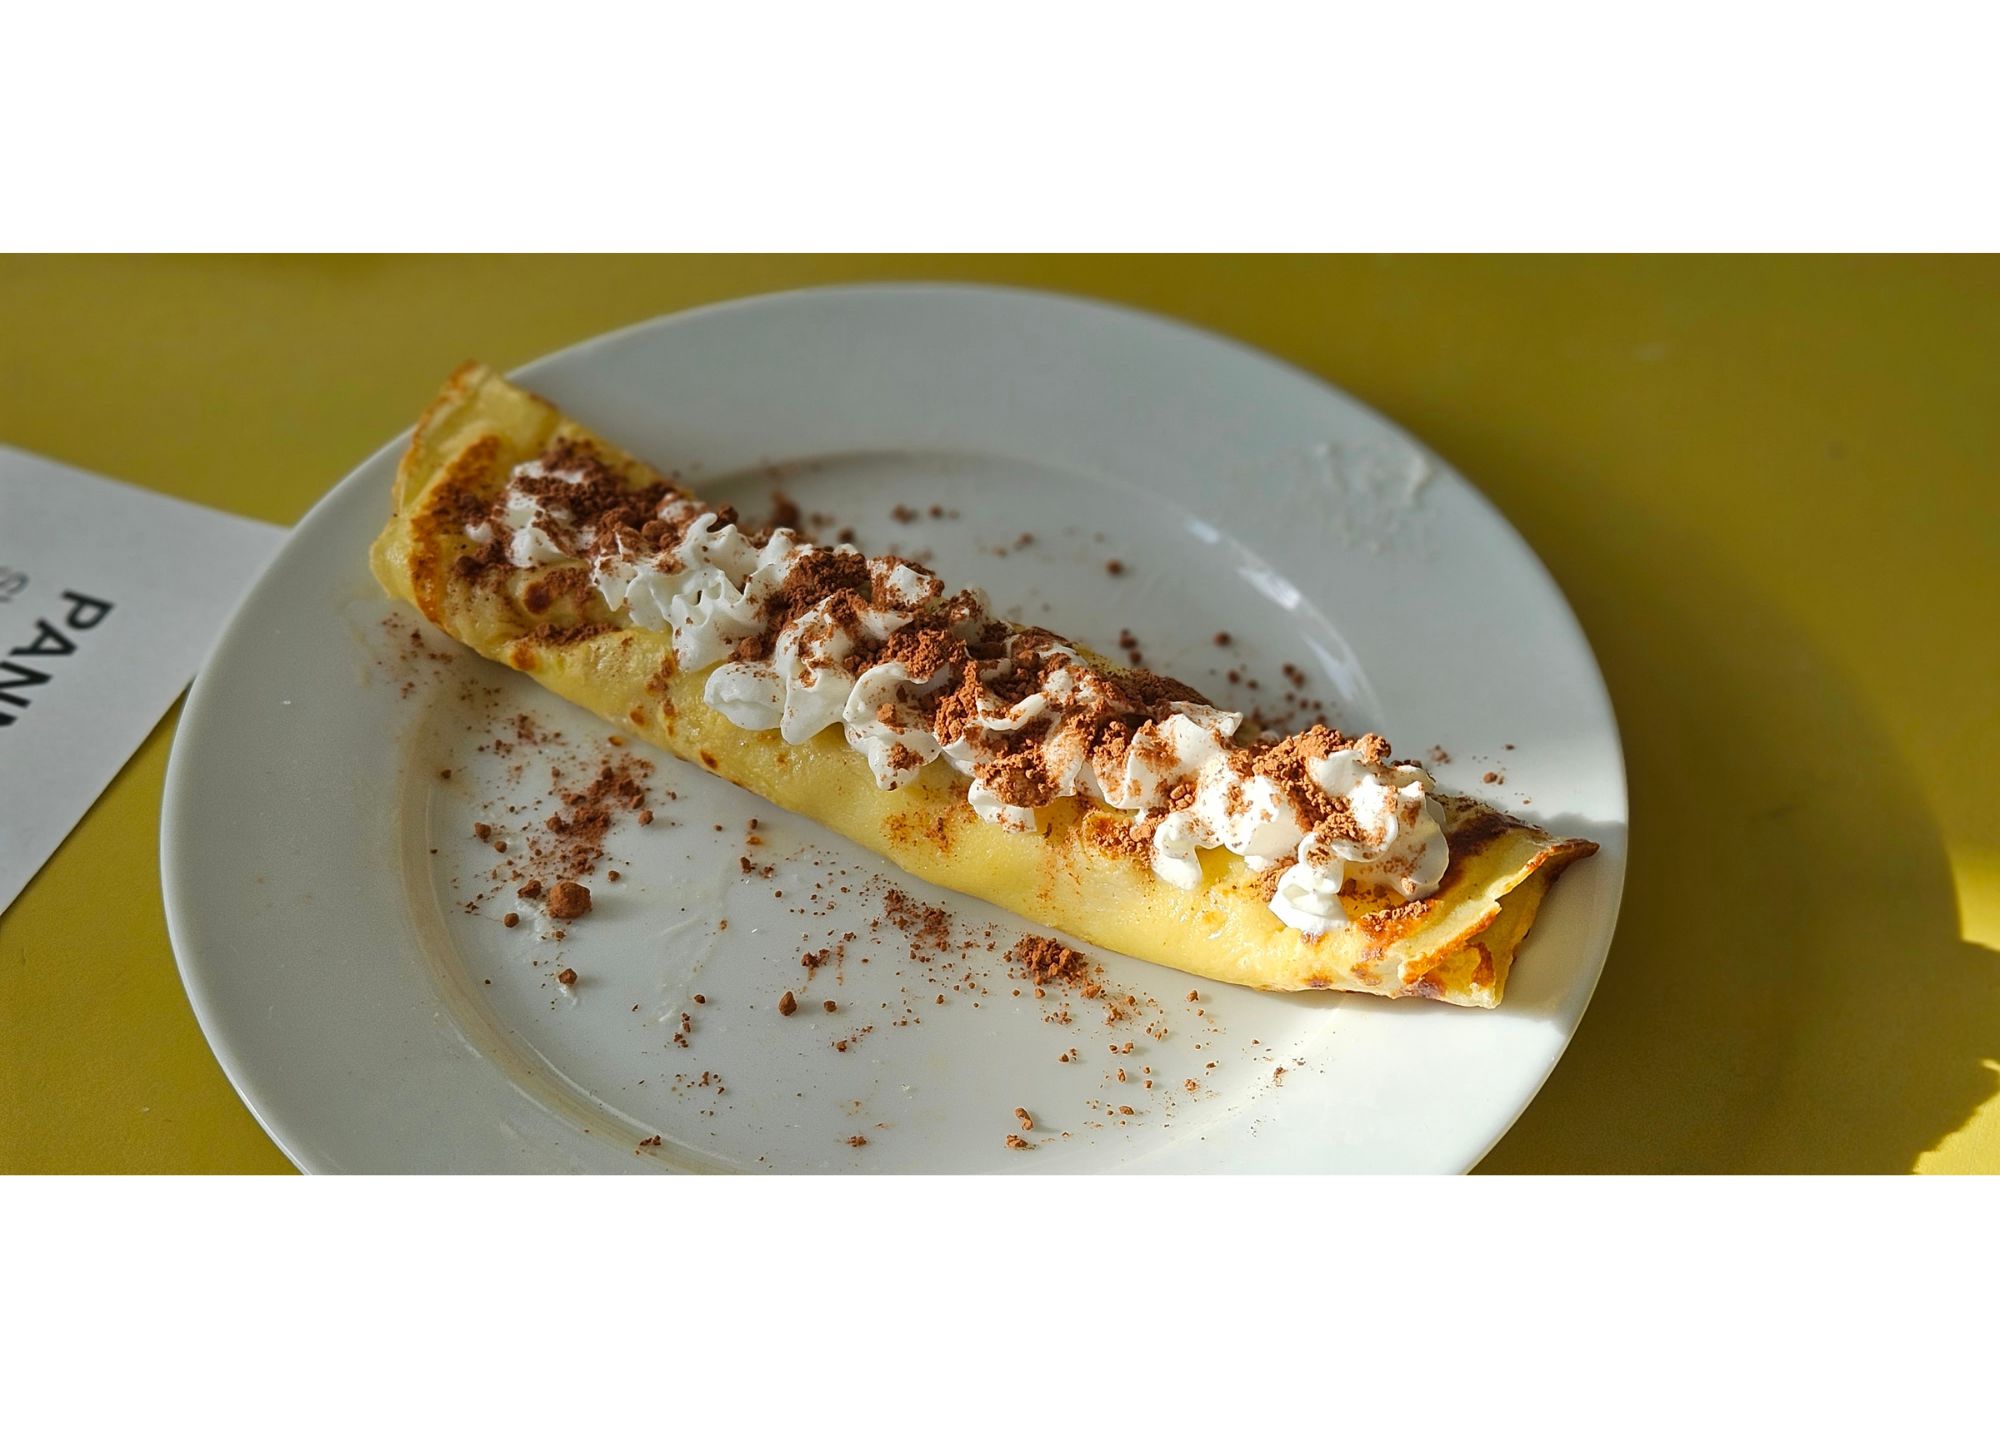 A crepe displayed on a white plate with whipped cream and cocoa sprinkled on top